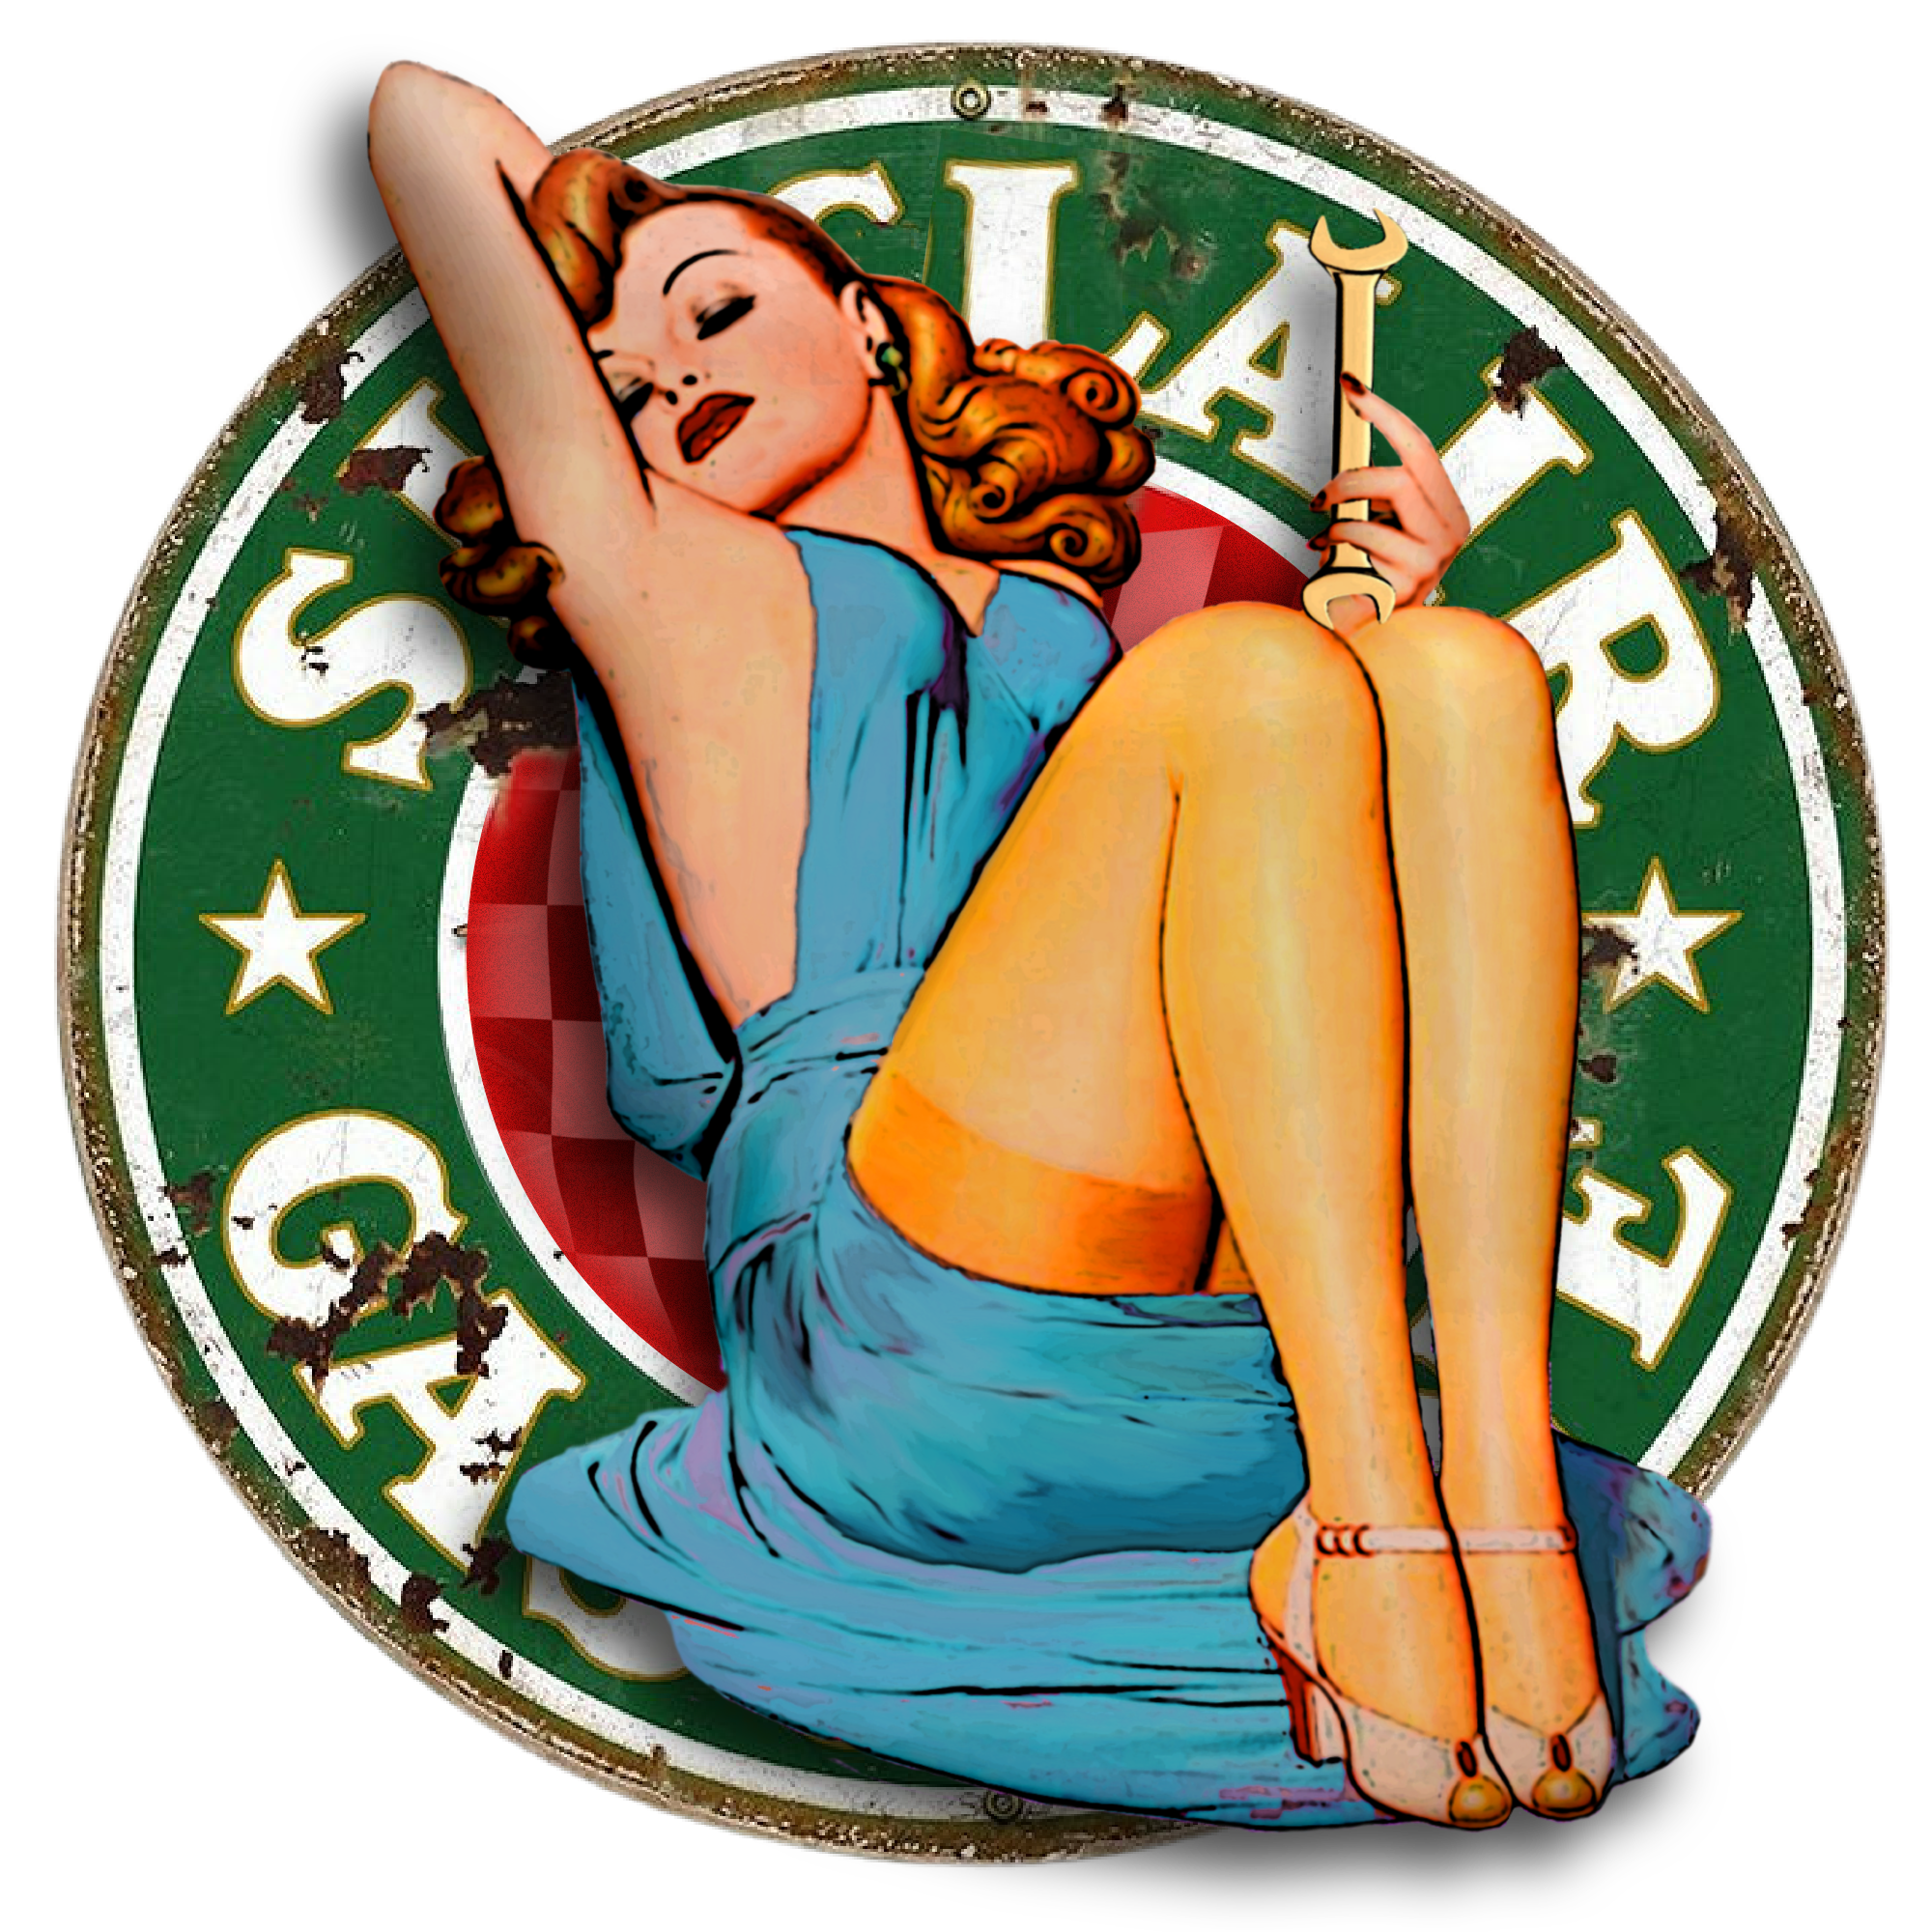 Ms. Sinclair Wrench Pin Up Girl - Image